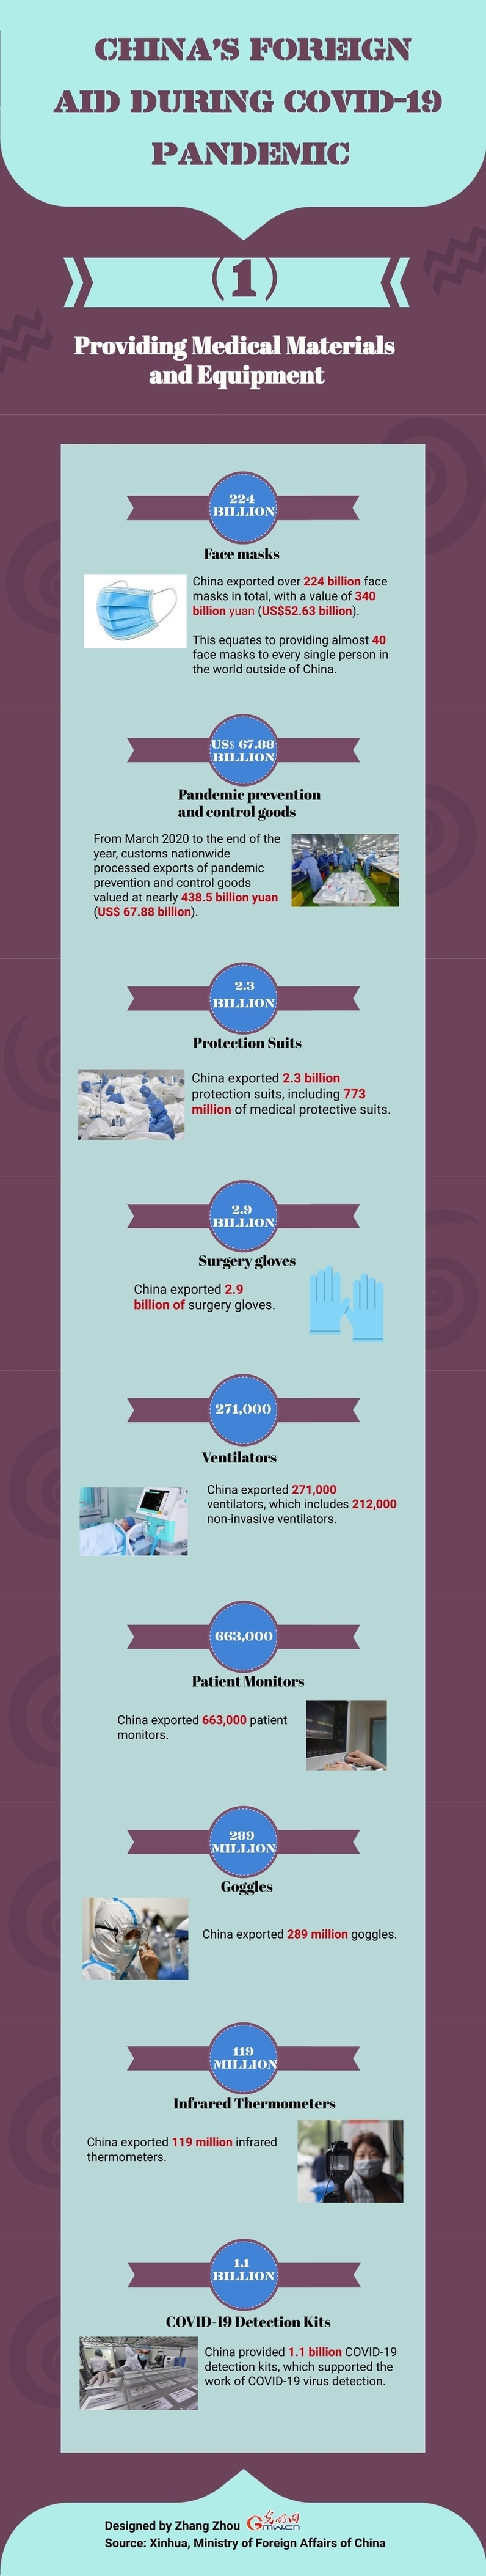 Infographic: China’s Foreign Aid during COVID-19 Pandemic (1)——Providing Medical Materials and Equipment